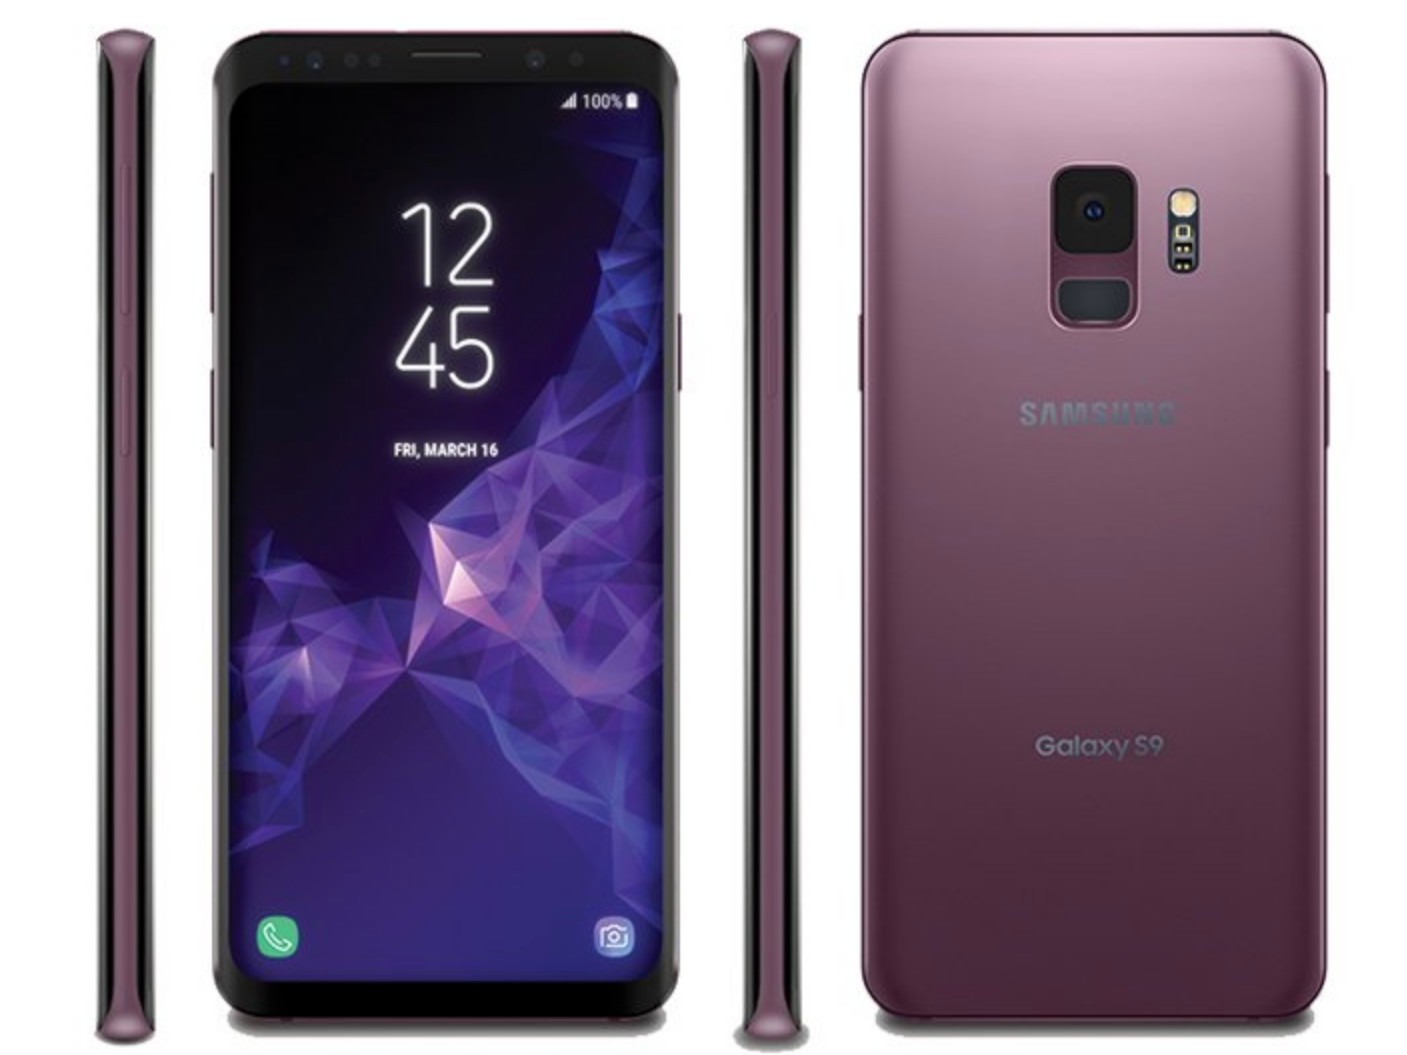 Samsung Galaxy S9 and S9+ to be announced this February 2018